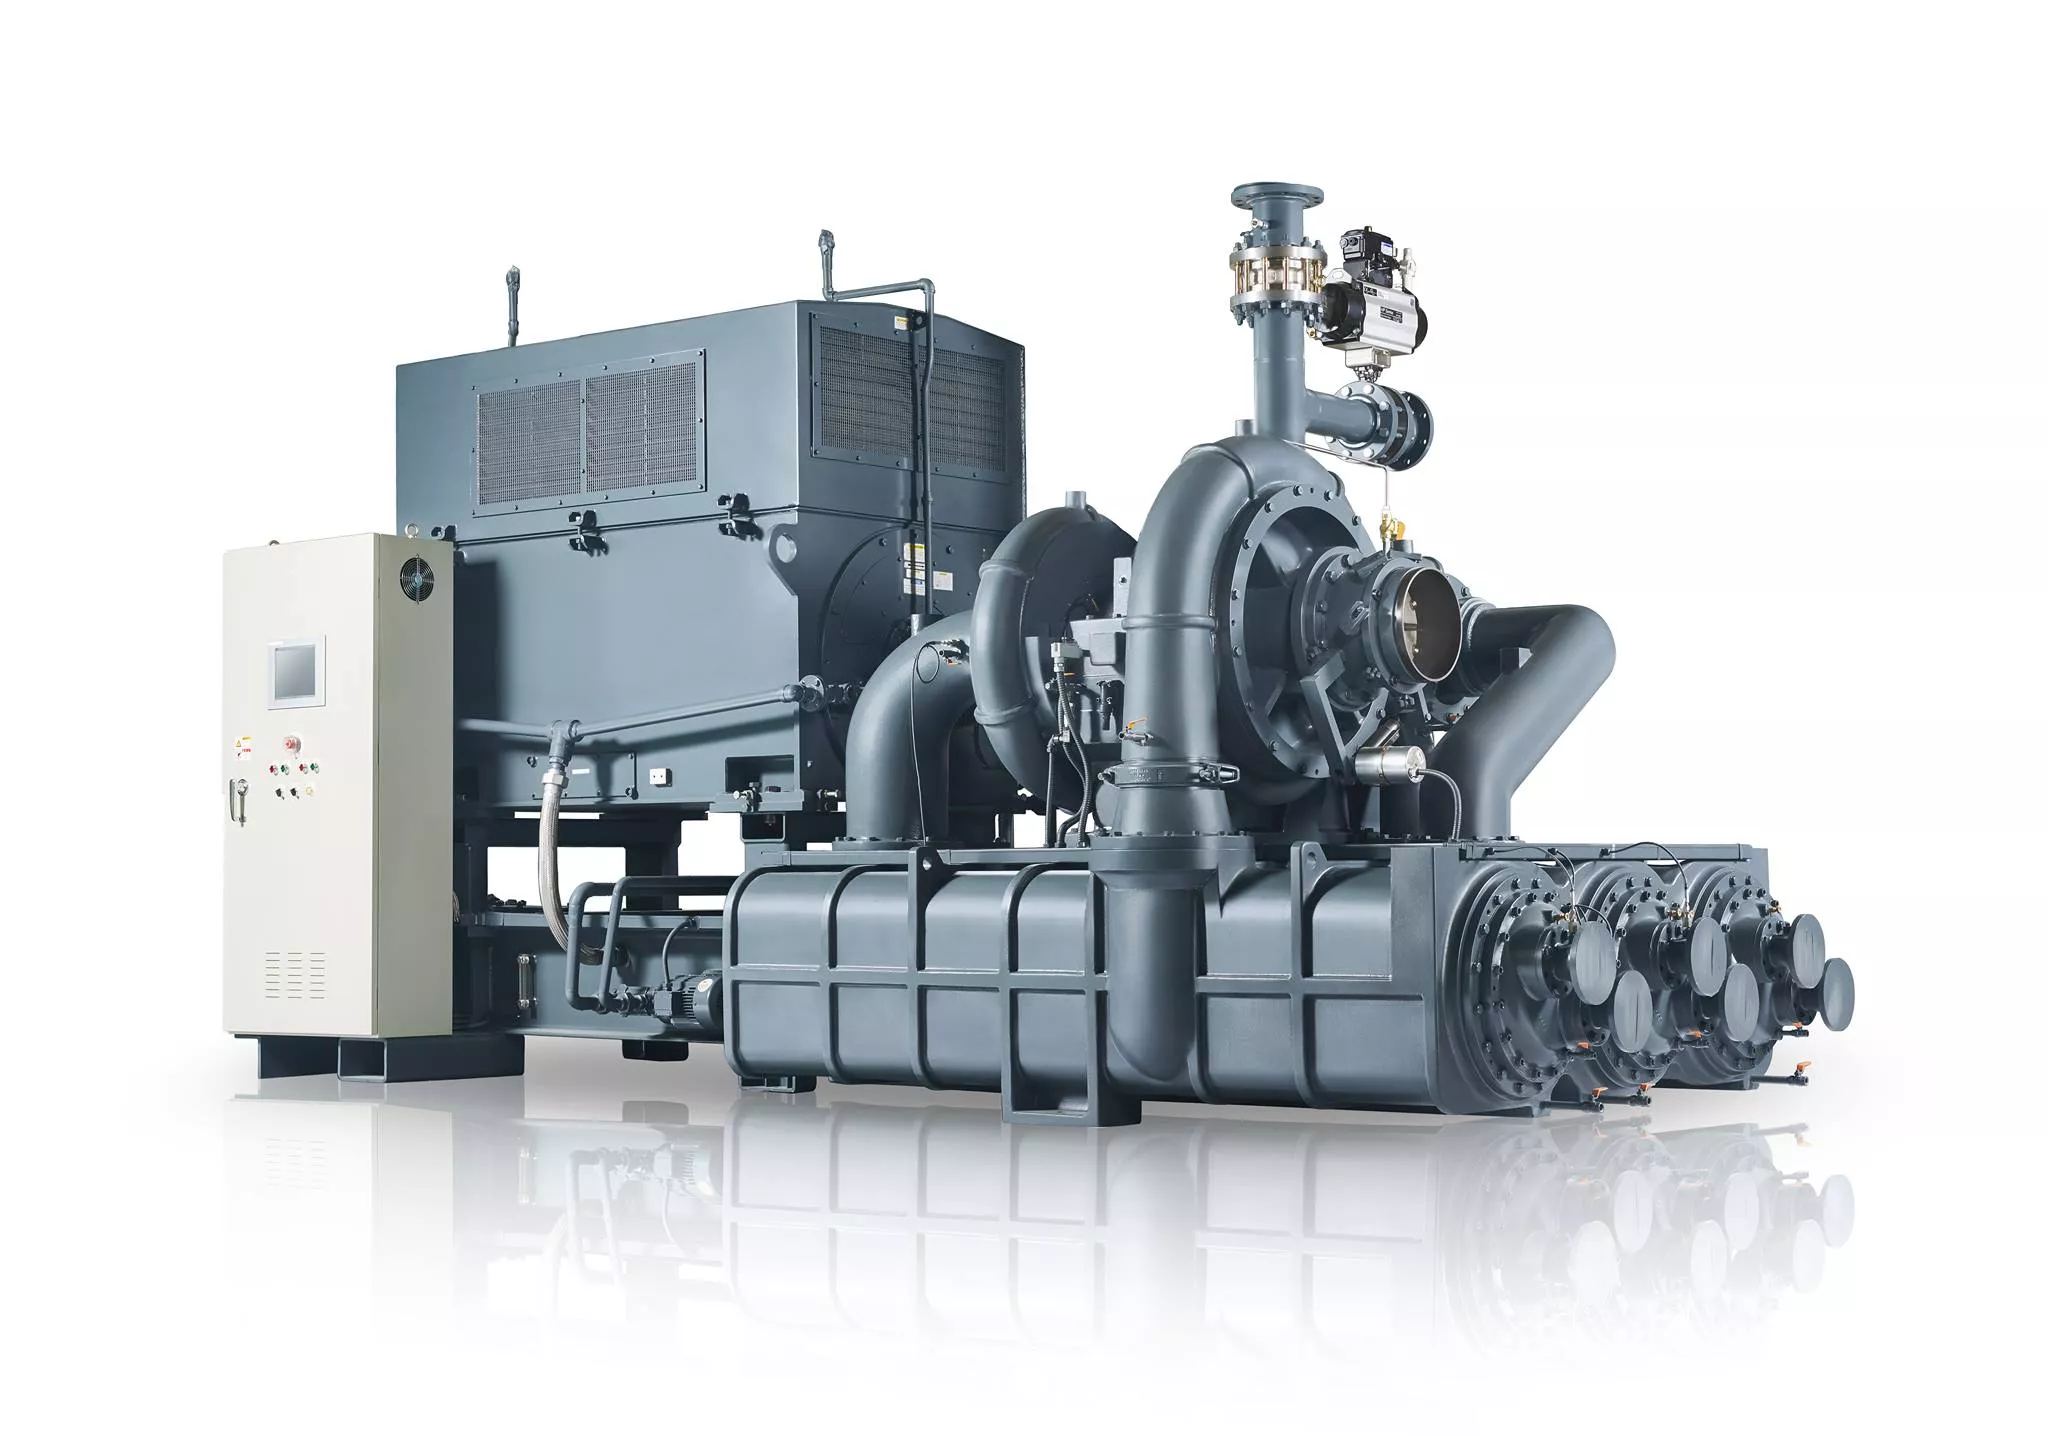 Importance of compressors in the combustion of fuel gases